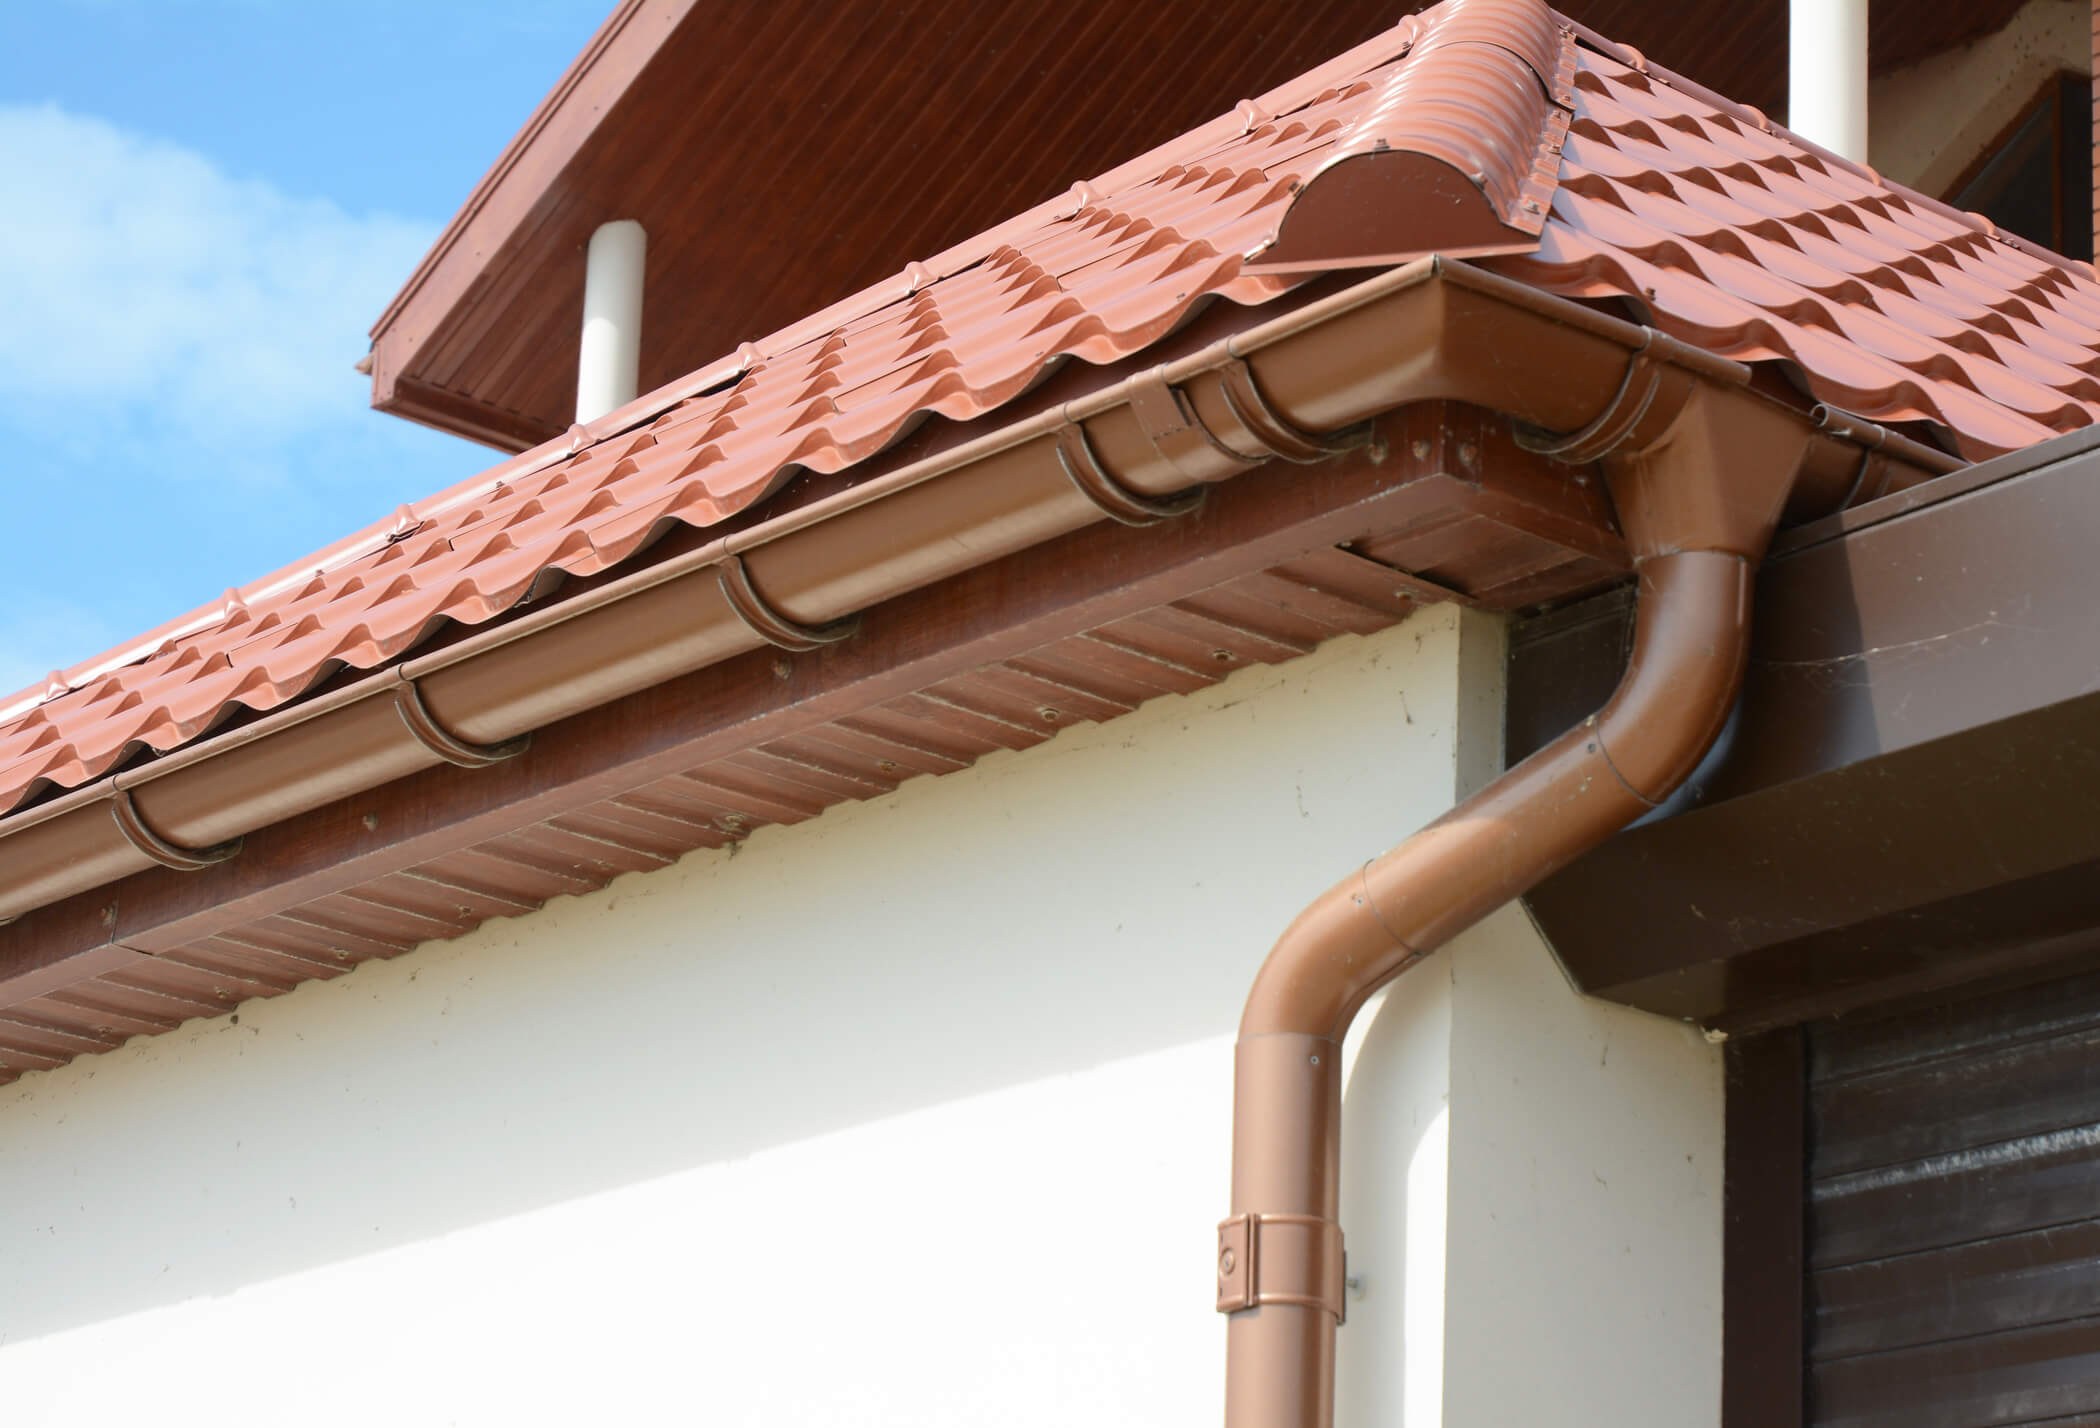 House attic metal roof with soffits, fascias, roof guttering, downspout gutter pipe.